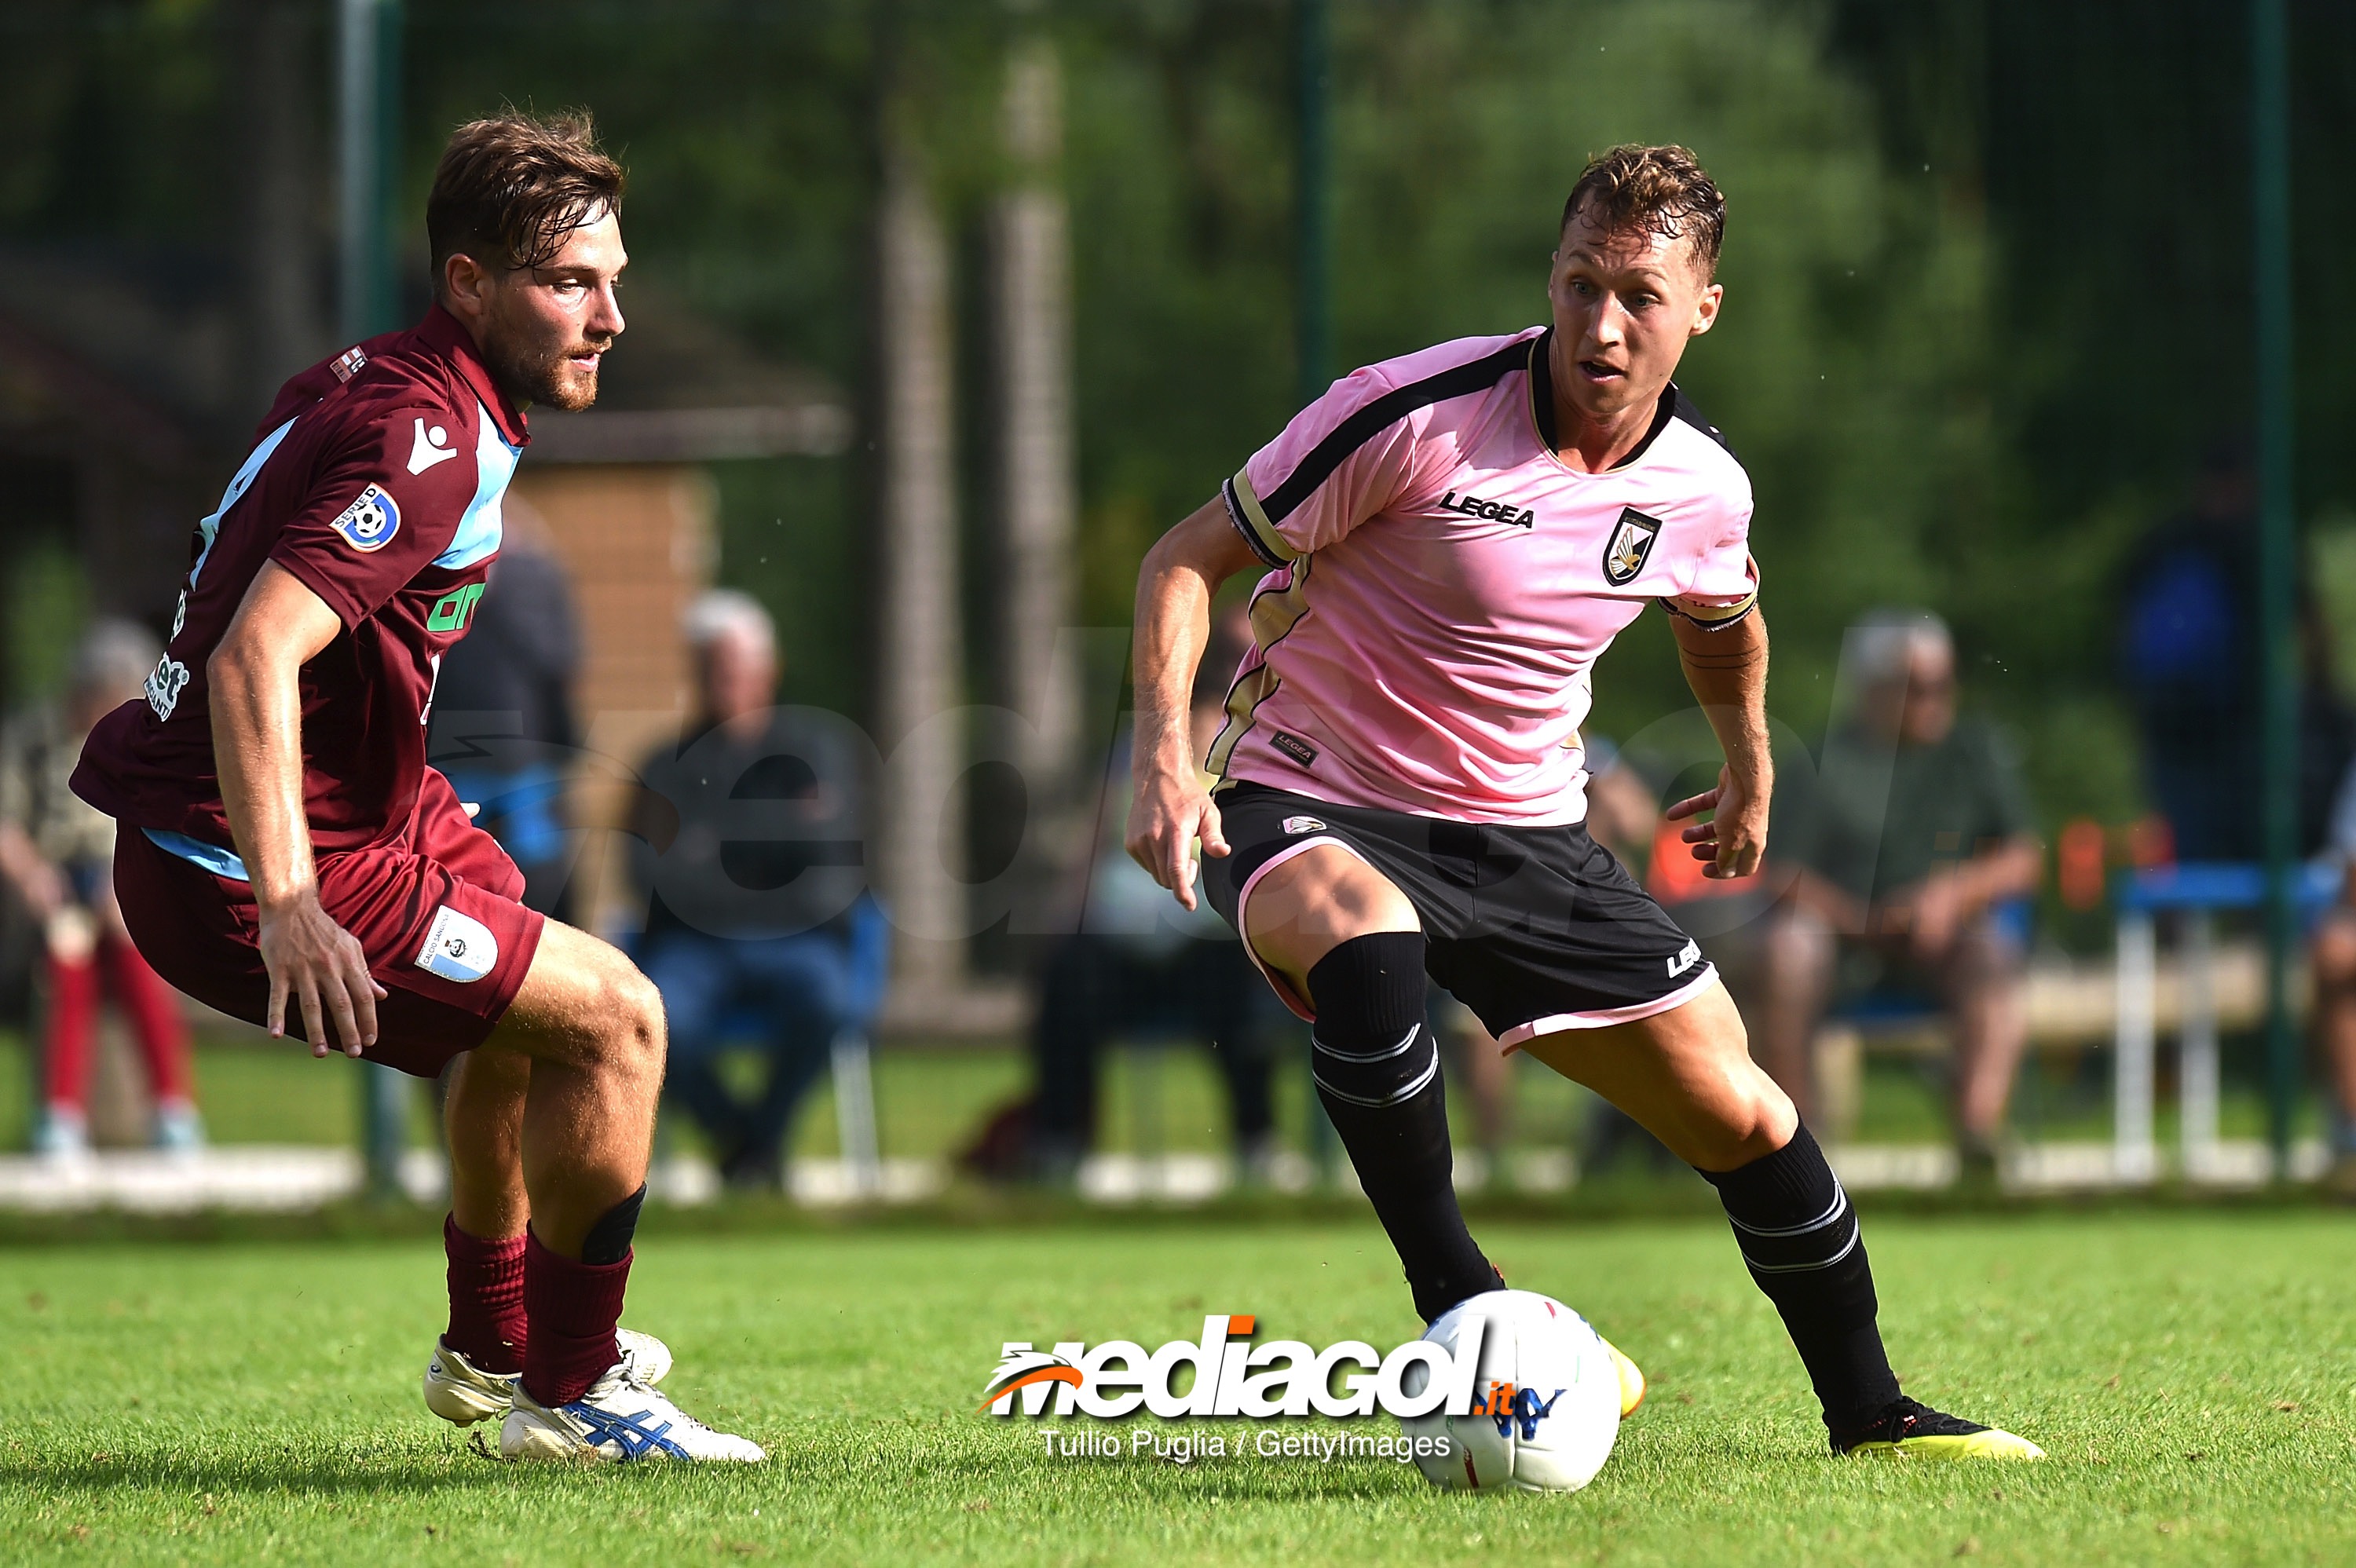 BELLUNO, ITALY - JULY 27:  Nicolas Haas of Palermo in action during a friendly match between US Citta' di Palermo and San Dona' at the US Citta' di Palermo training camp on July 27, 2018 in Belluno, Italy.  (Photo by Tullio M. Puglia/Getty Images)